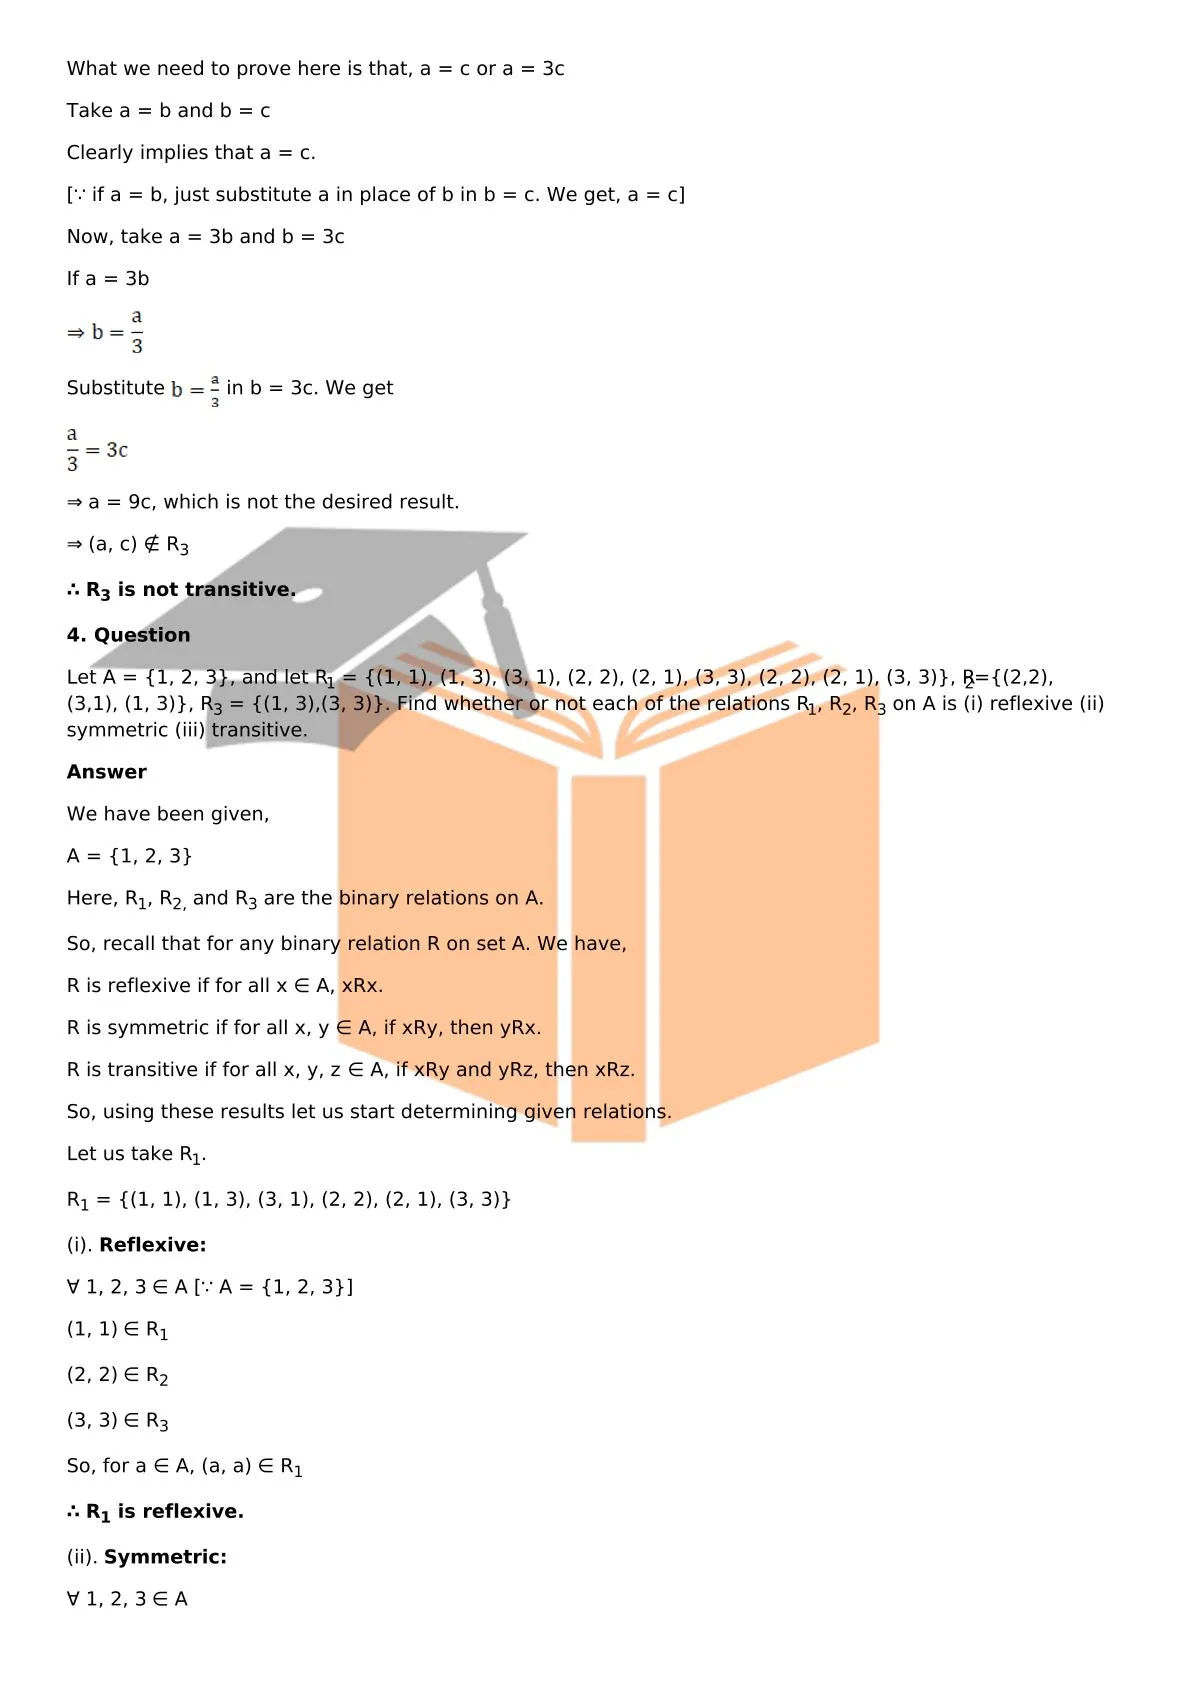 RD Sharma Solutions For Class 12 Maths Chapter 1 Relations